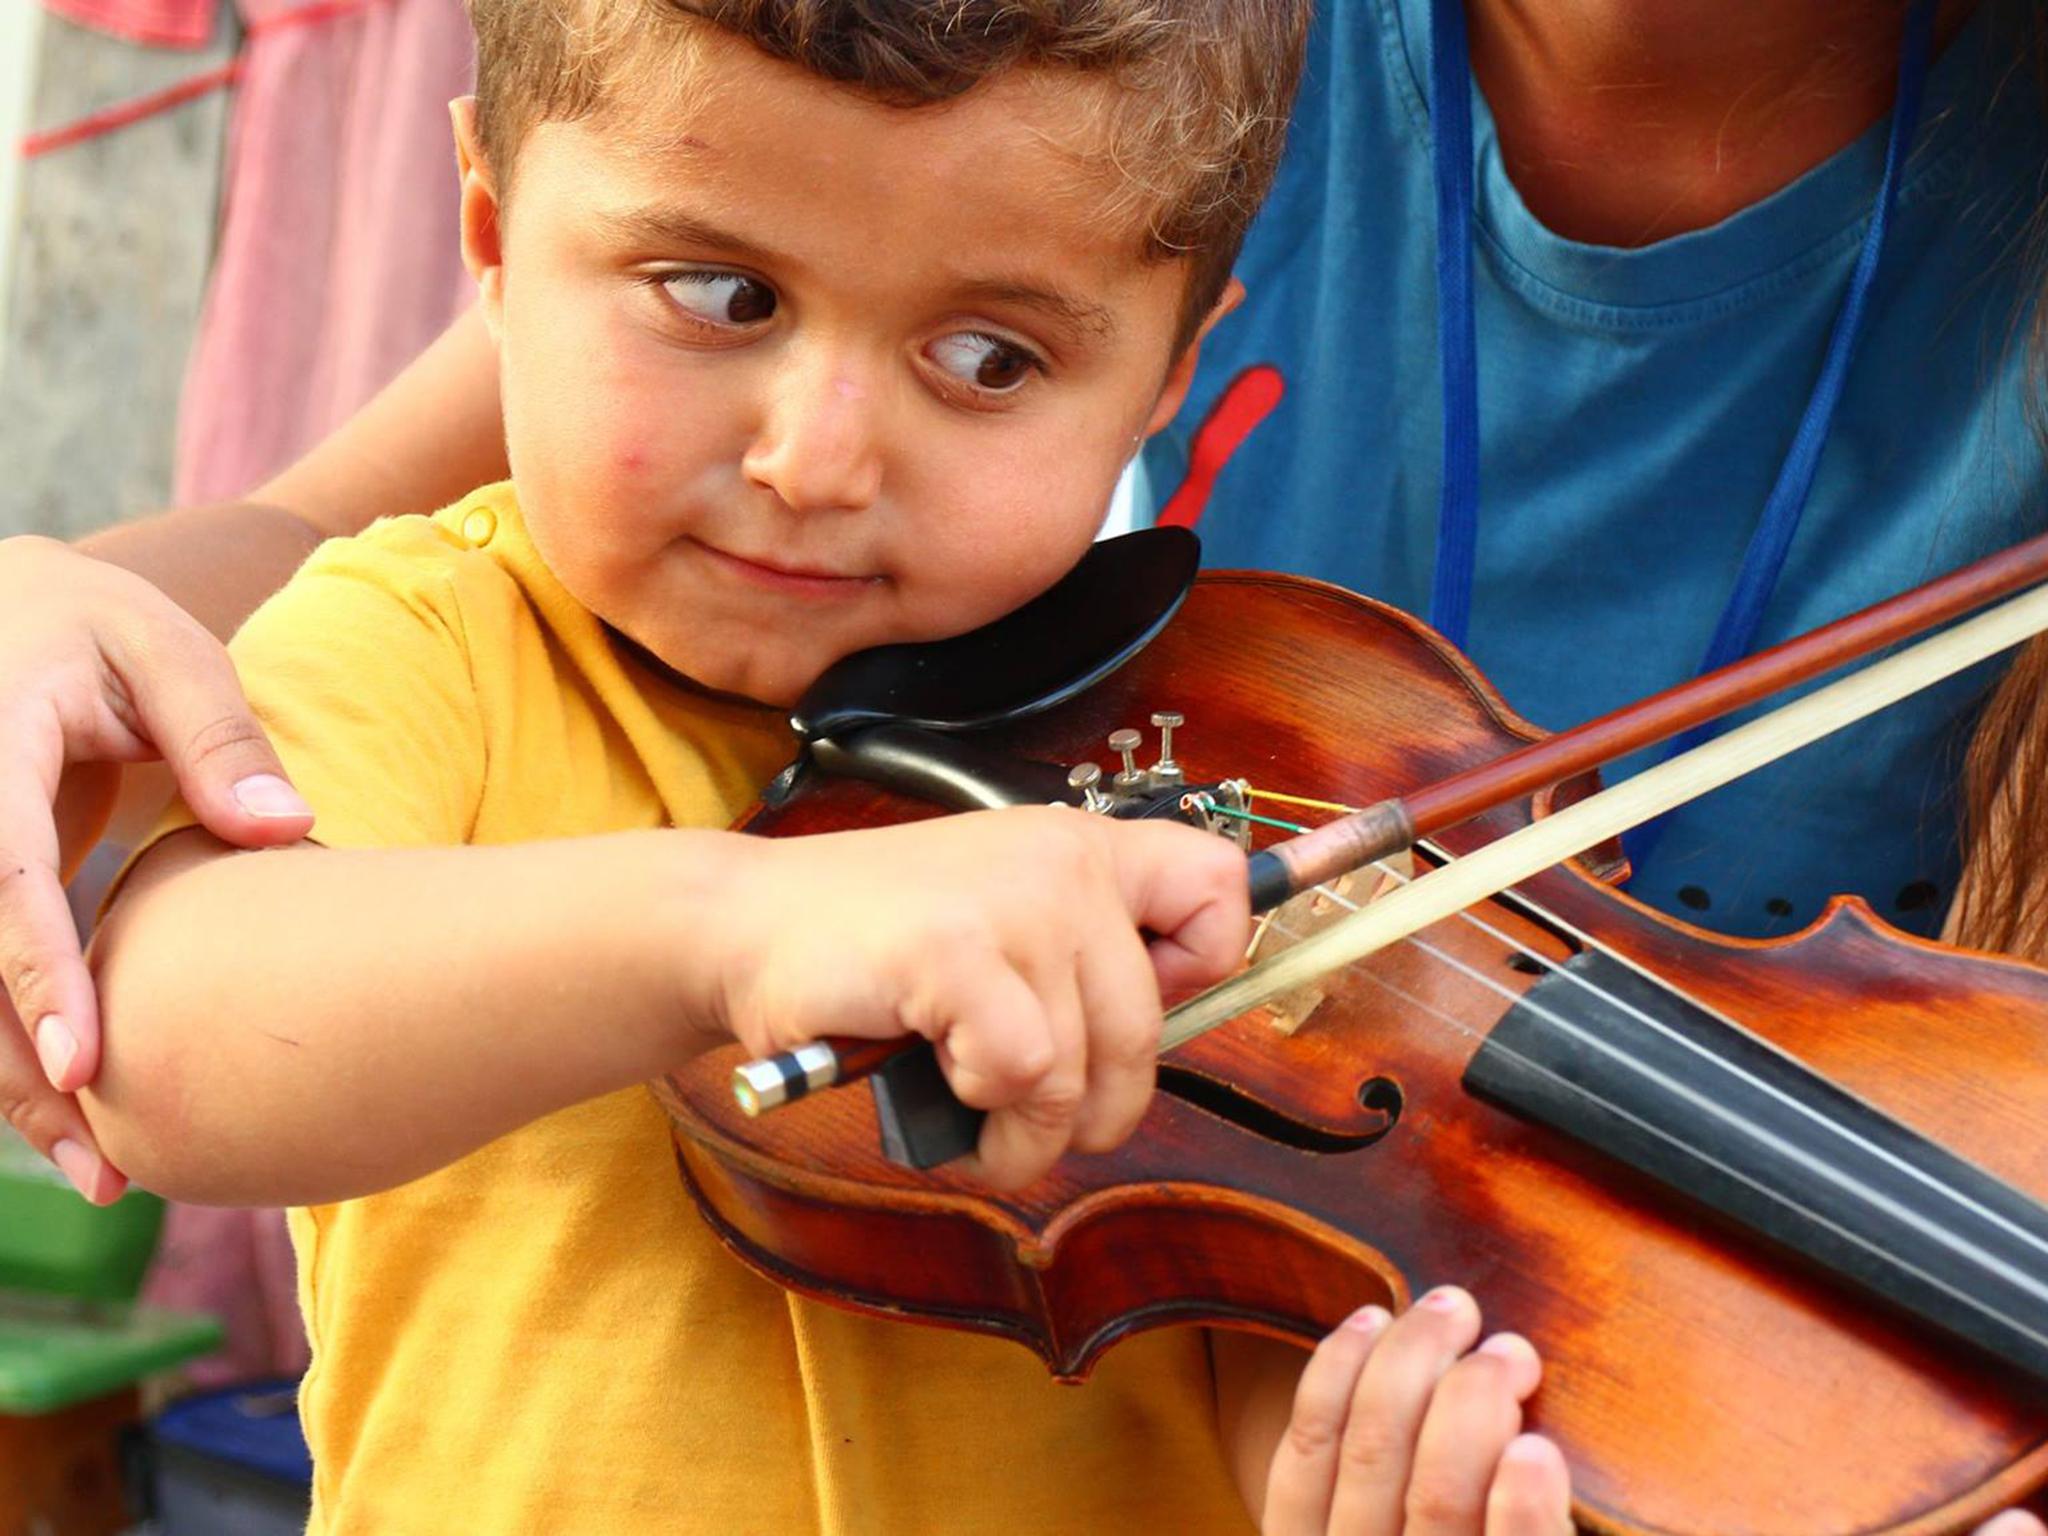 Violin lessons offer a welcome distraction for the children (Angels Relief Team)